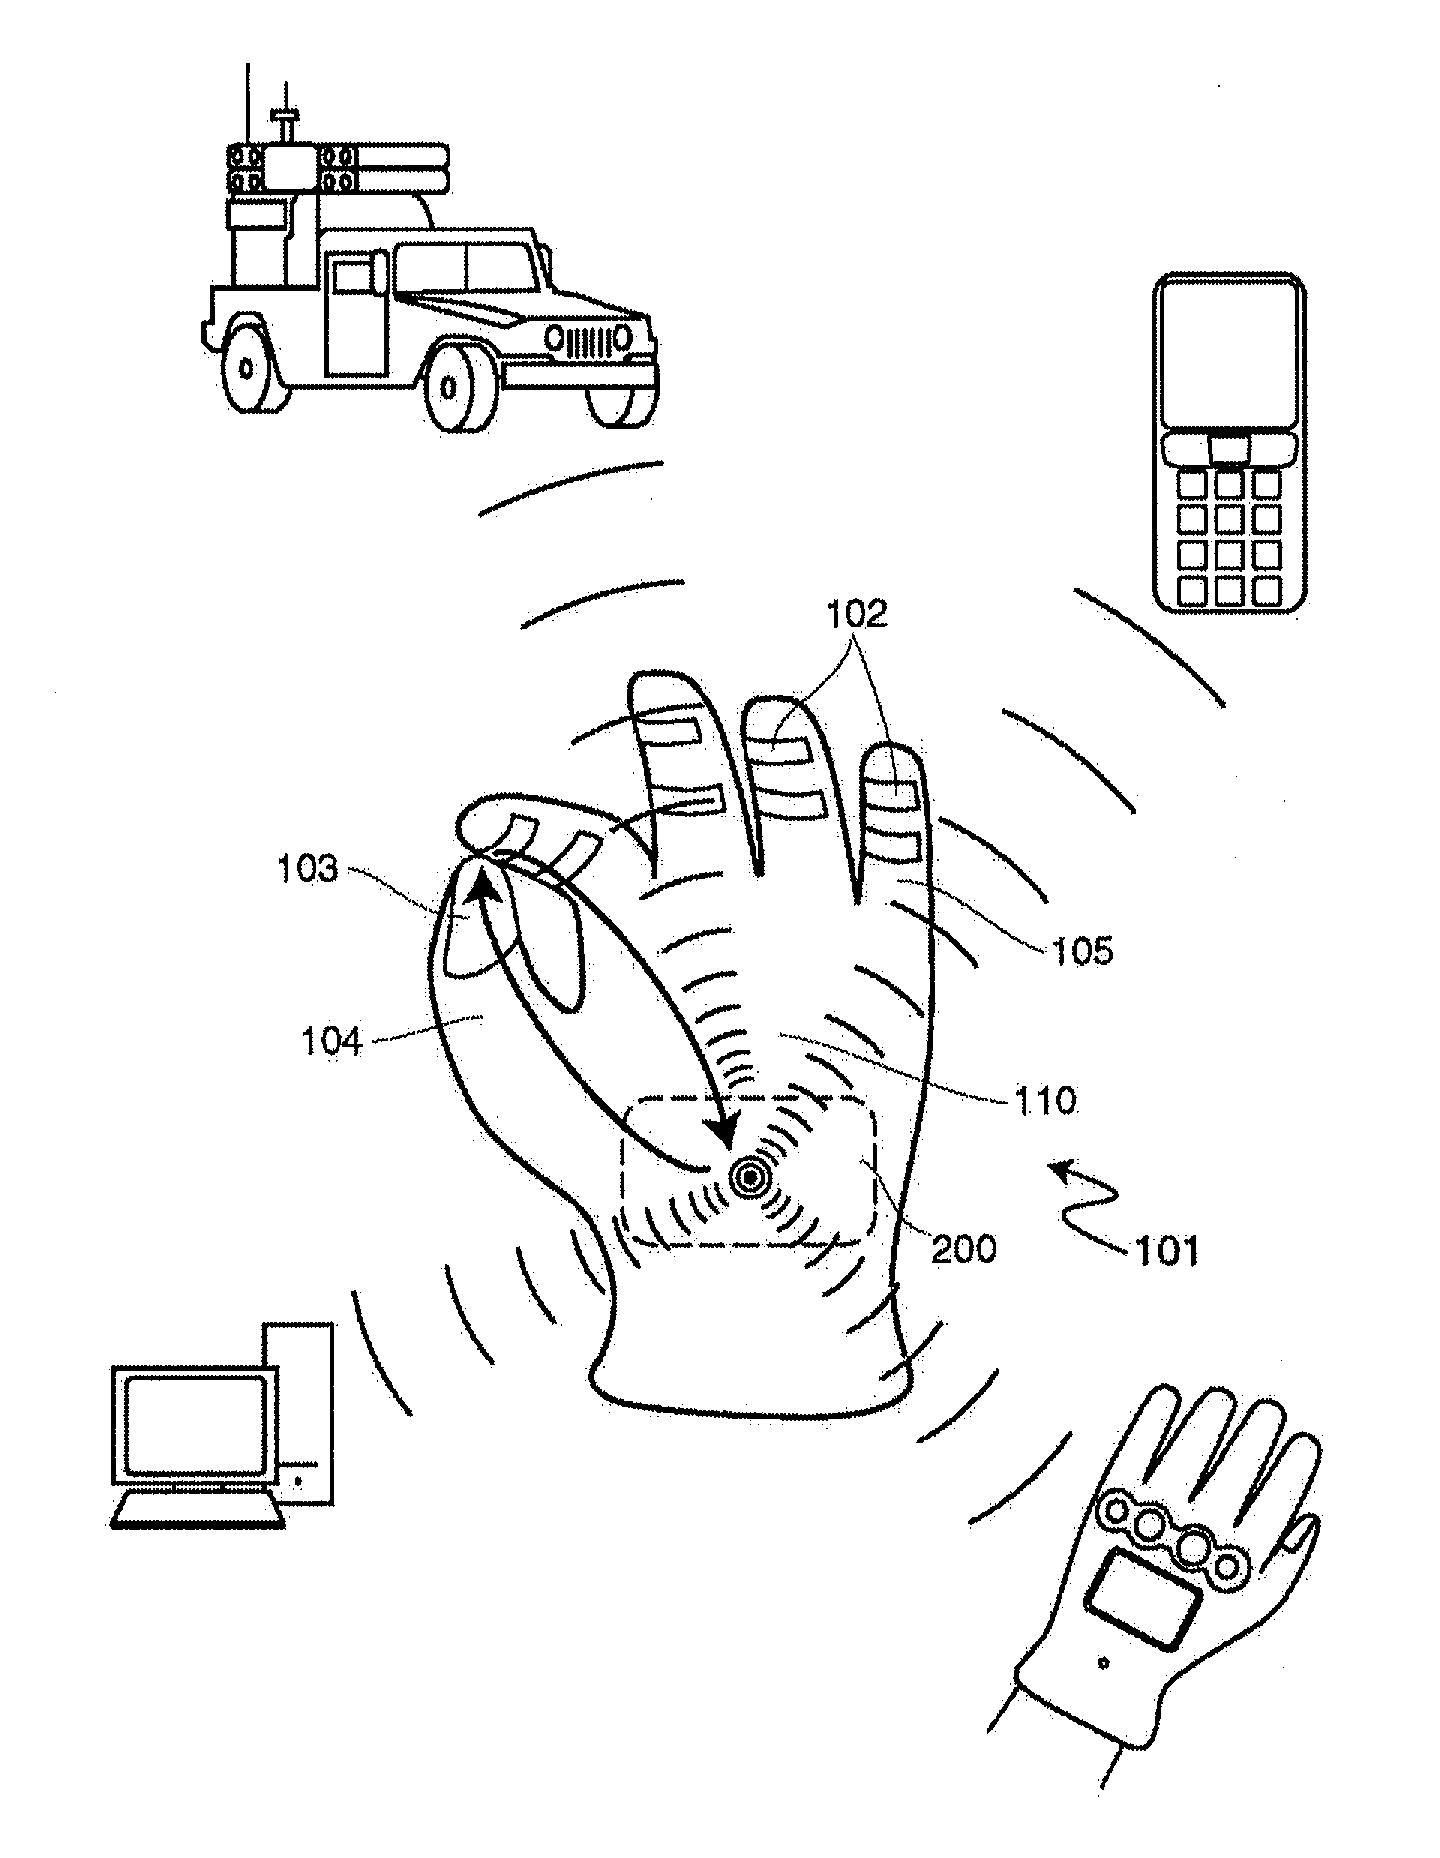 Electronic Control Glove